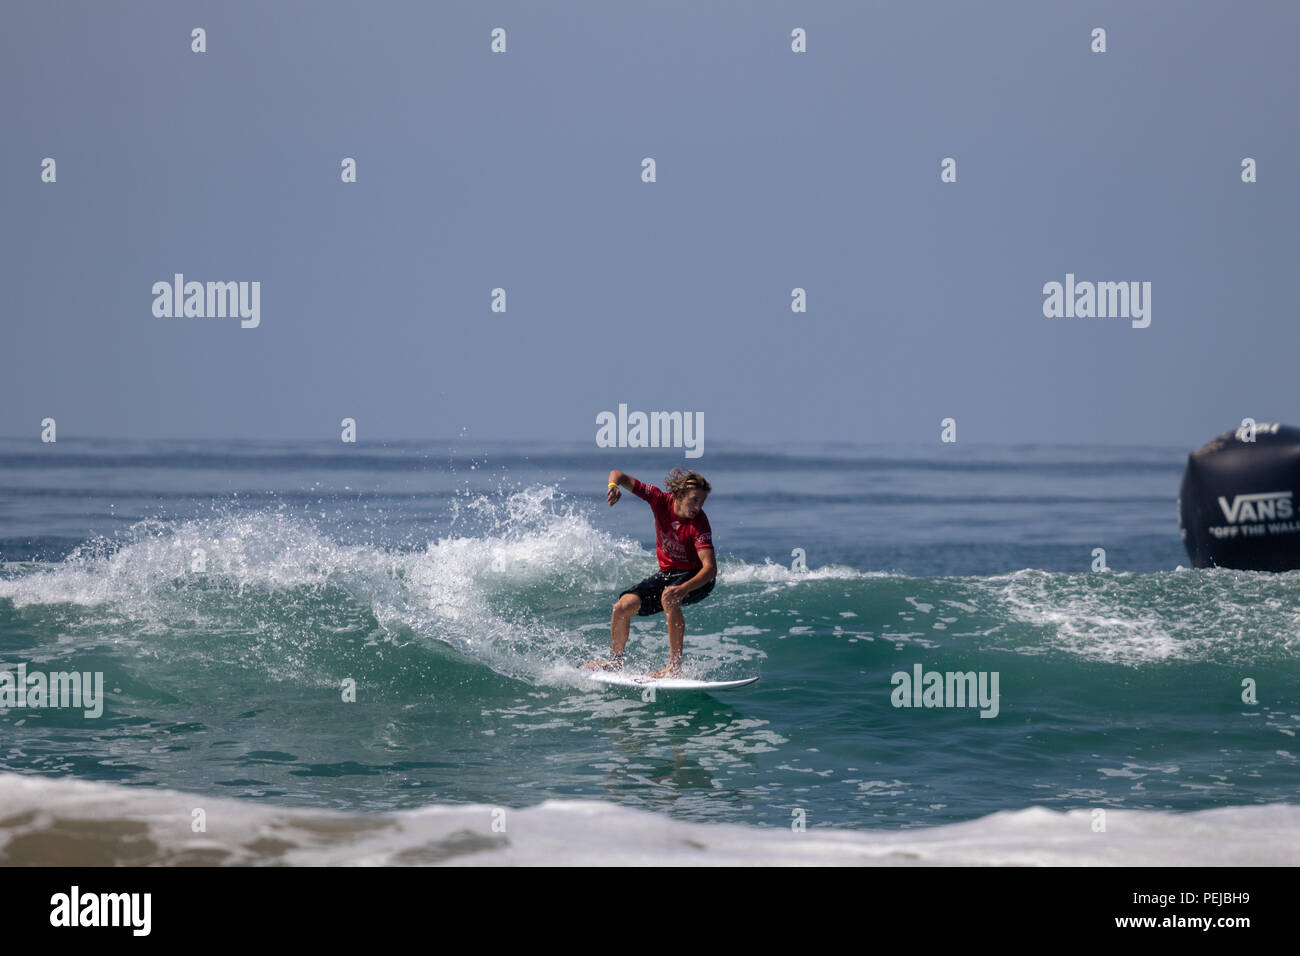 Jake Marshall competing in the US Open of Surfing 2018 Stock Photo